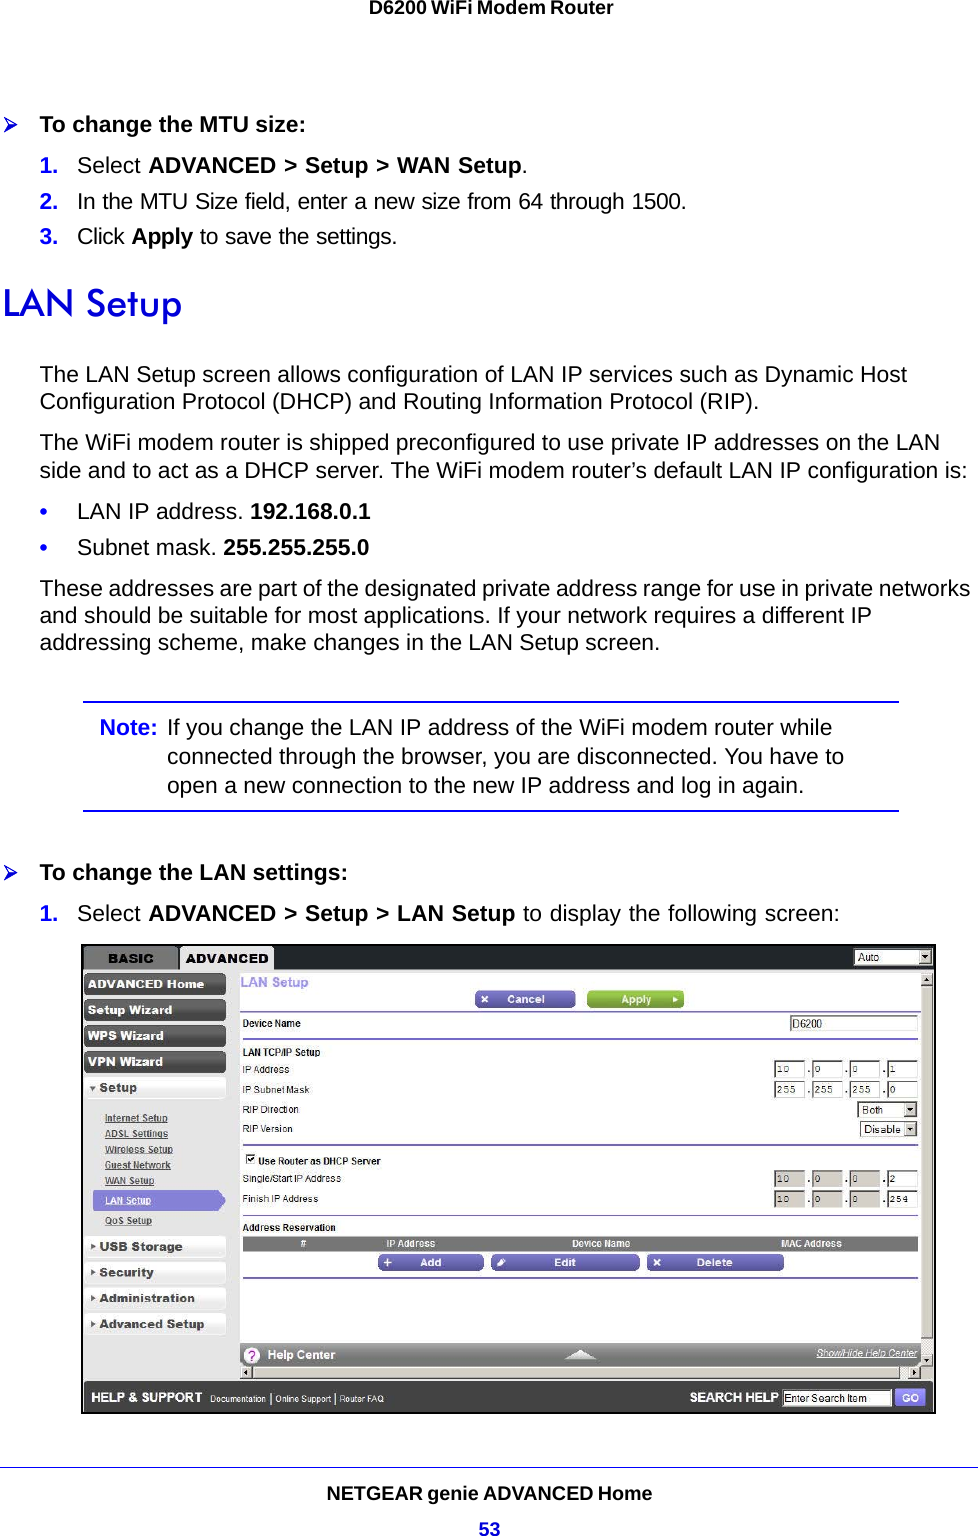 NETGEAR genie ADVANCED Home53 D6200 WiFi Modem RouterTo change the MTU size:1. Select ADVANCED &gt; Setup &gt; WAN Setup. 2. In the MTU Size field, enter a new size from 64 through 1500.3. Click Apply to save the settings.LAN SetupThe LAN Setup screen allows configuration of LAN IP services such as Dynamic Host Configuration Protocol (DHCP) and Routing Information Protocol (RIP).The WiFi modem router is shipped preconfigured to use private IP addresses on the LAN side and to act as a DHCP server. The WiFi modem router’s default LAN IP configuration is:•LAN IP address. 192.168.0.1•Subnet mask. 255.255.255.0These addresses are part of the designated private address range for use in private networks and should be suitable for most applications. If your network requires a different IP addressing scheme, make changes in the LAN Setup screen.Note: If you change the LAN IP address of the WiFi modem router while connected through the browser, you are disconnected. You have to open a new connection to the new IP address and log in again.To change the LAN settings:1. Select ADVANCED &gt; Setup &gt; LAN Setup to display the following screen: